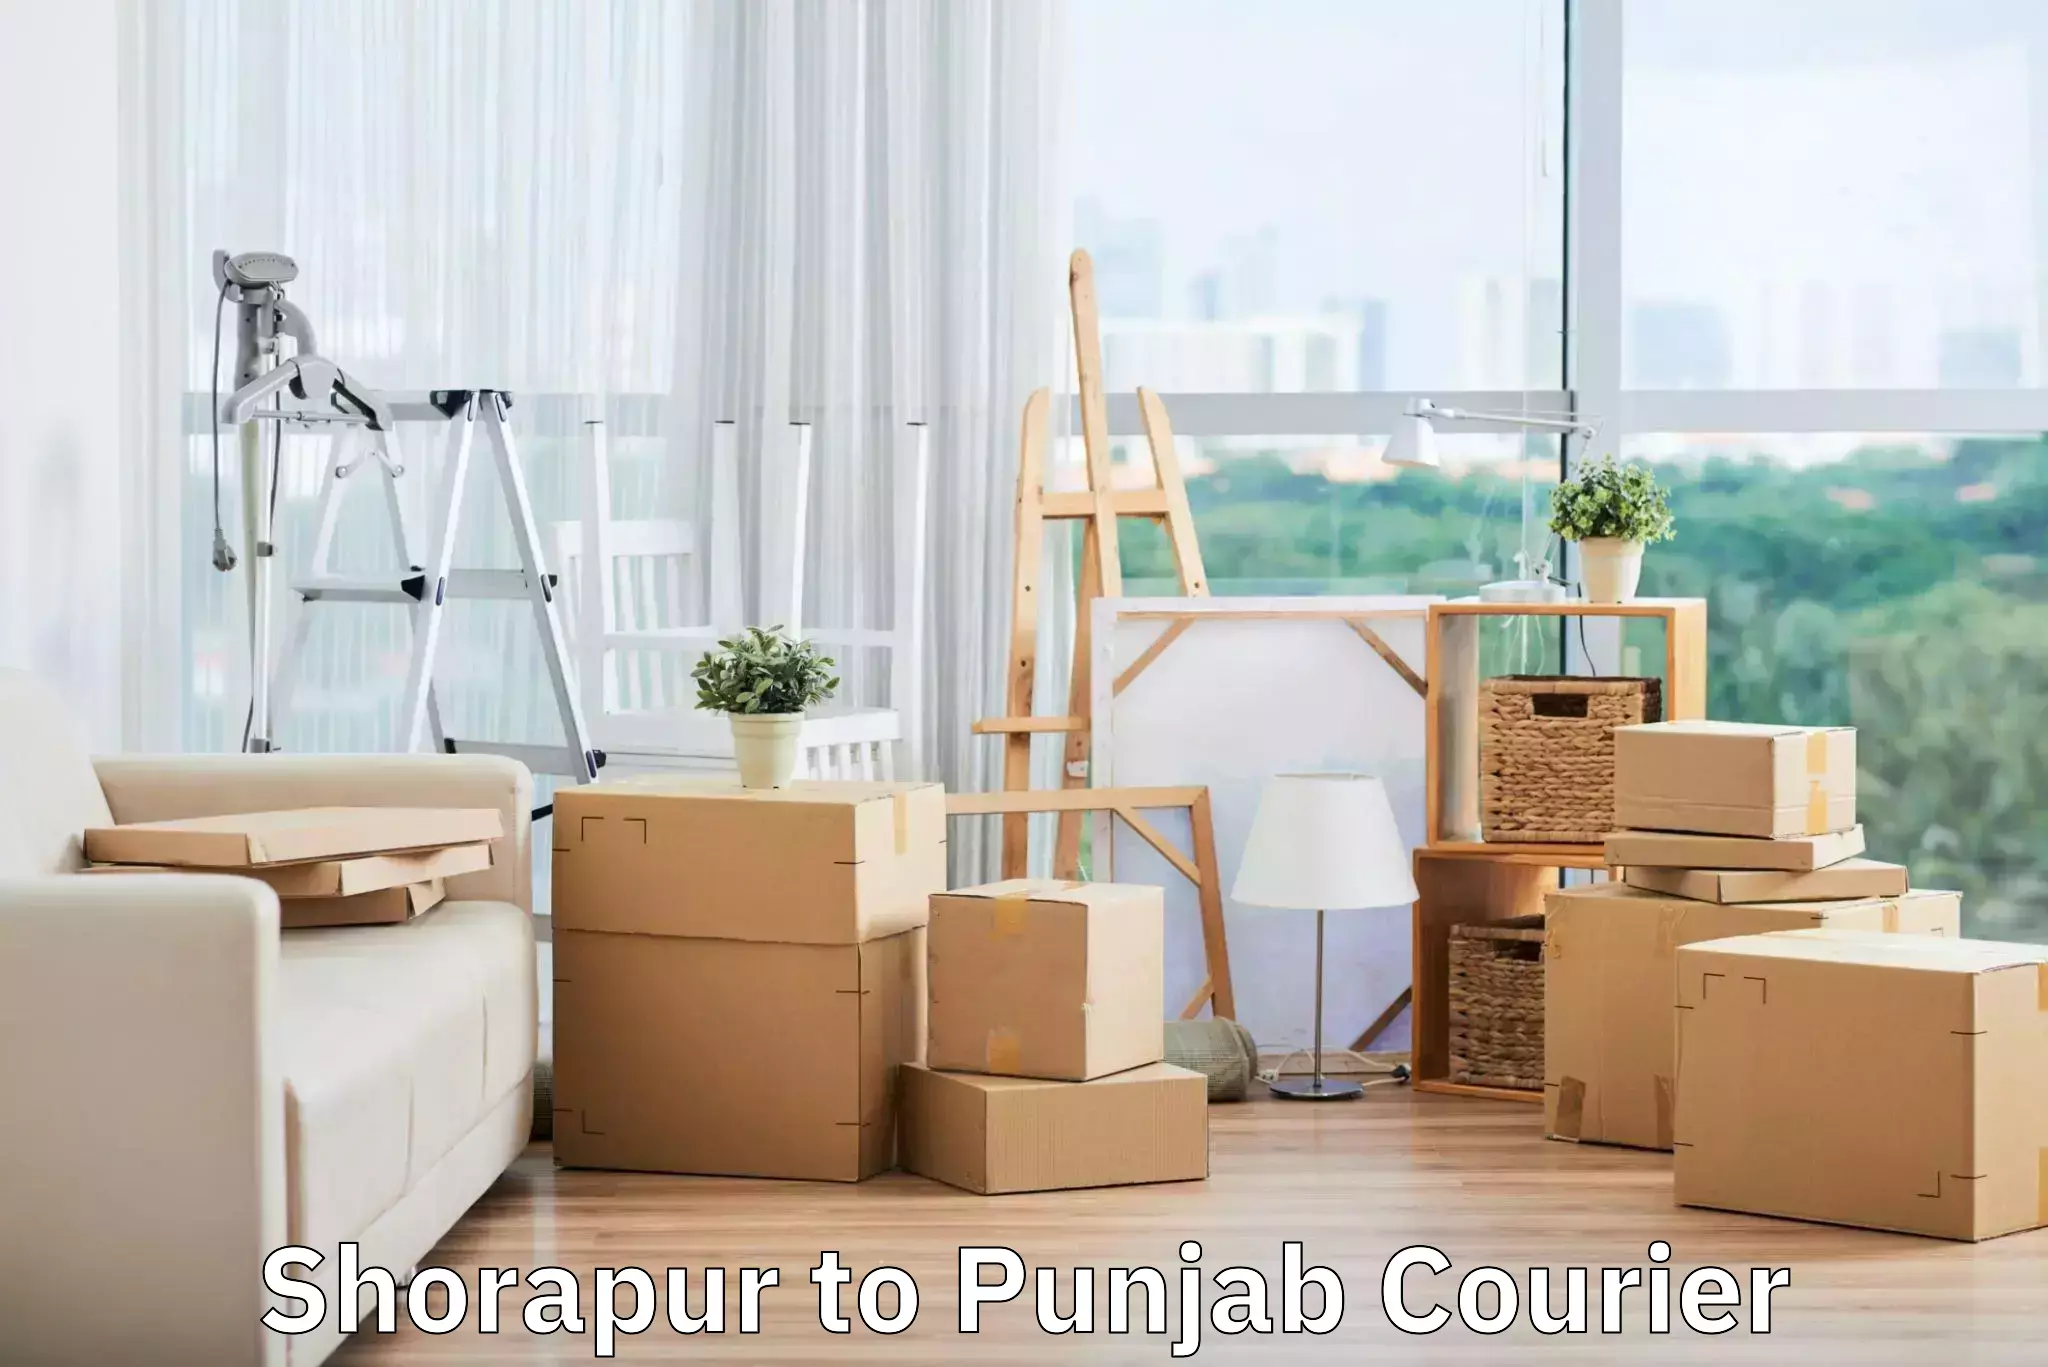 Luggage delivery system Shorapur to Punjab